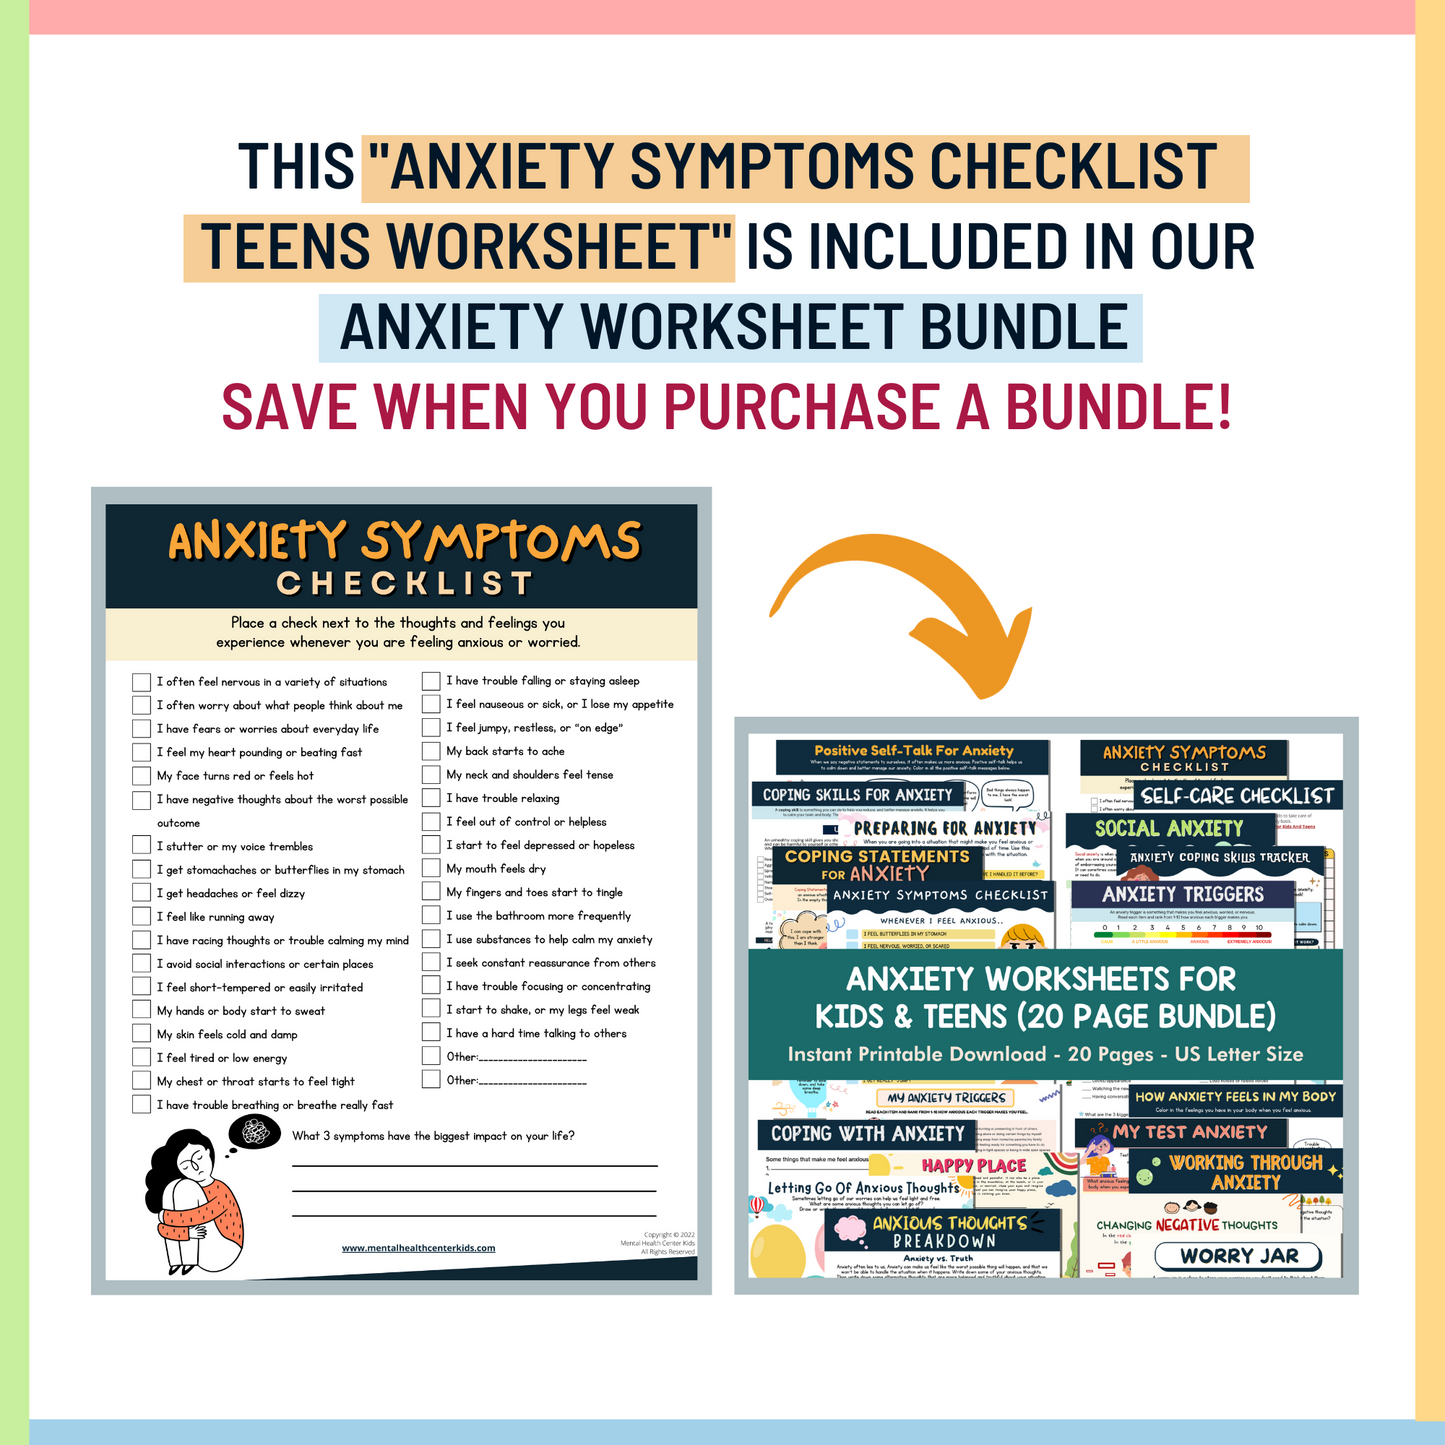 Anxiety Symptoms in Teens Checklist